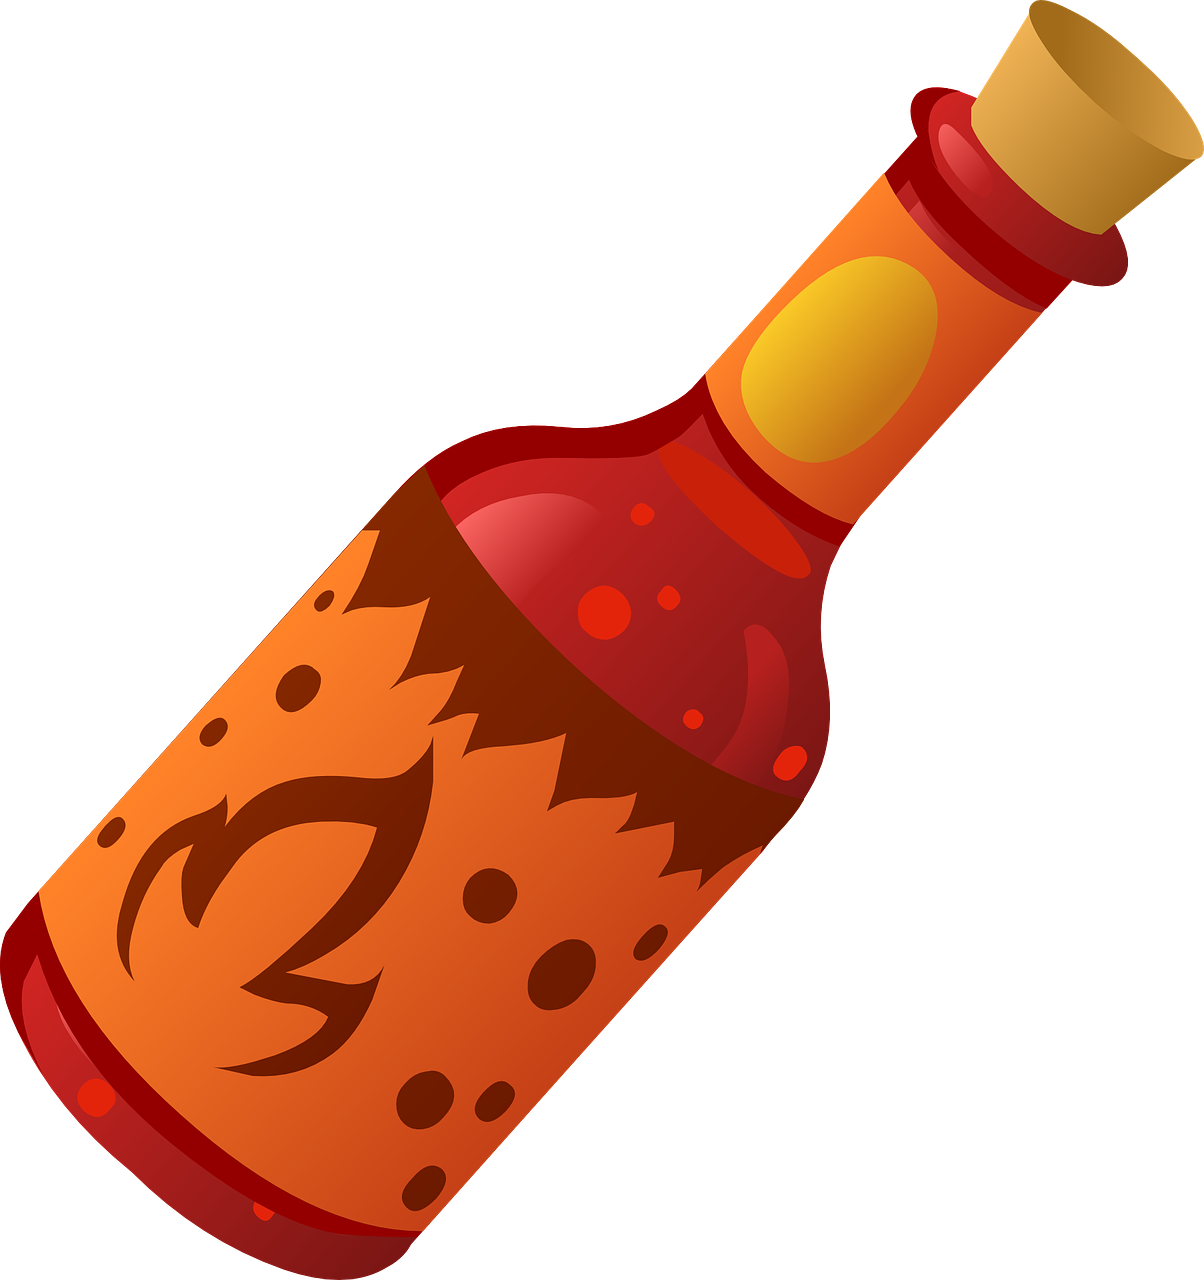 CANCELLED - CANCELLED: Hot Sauce - Tasting